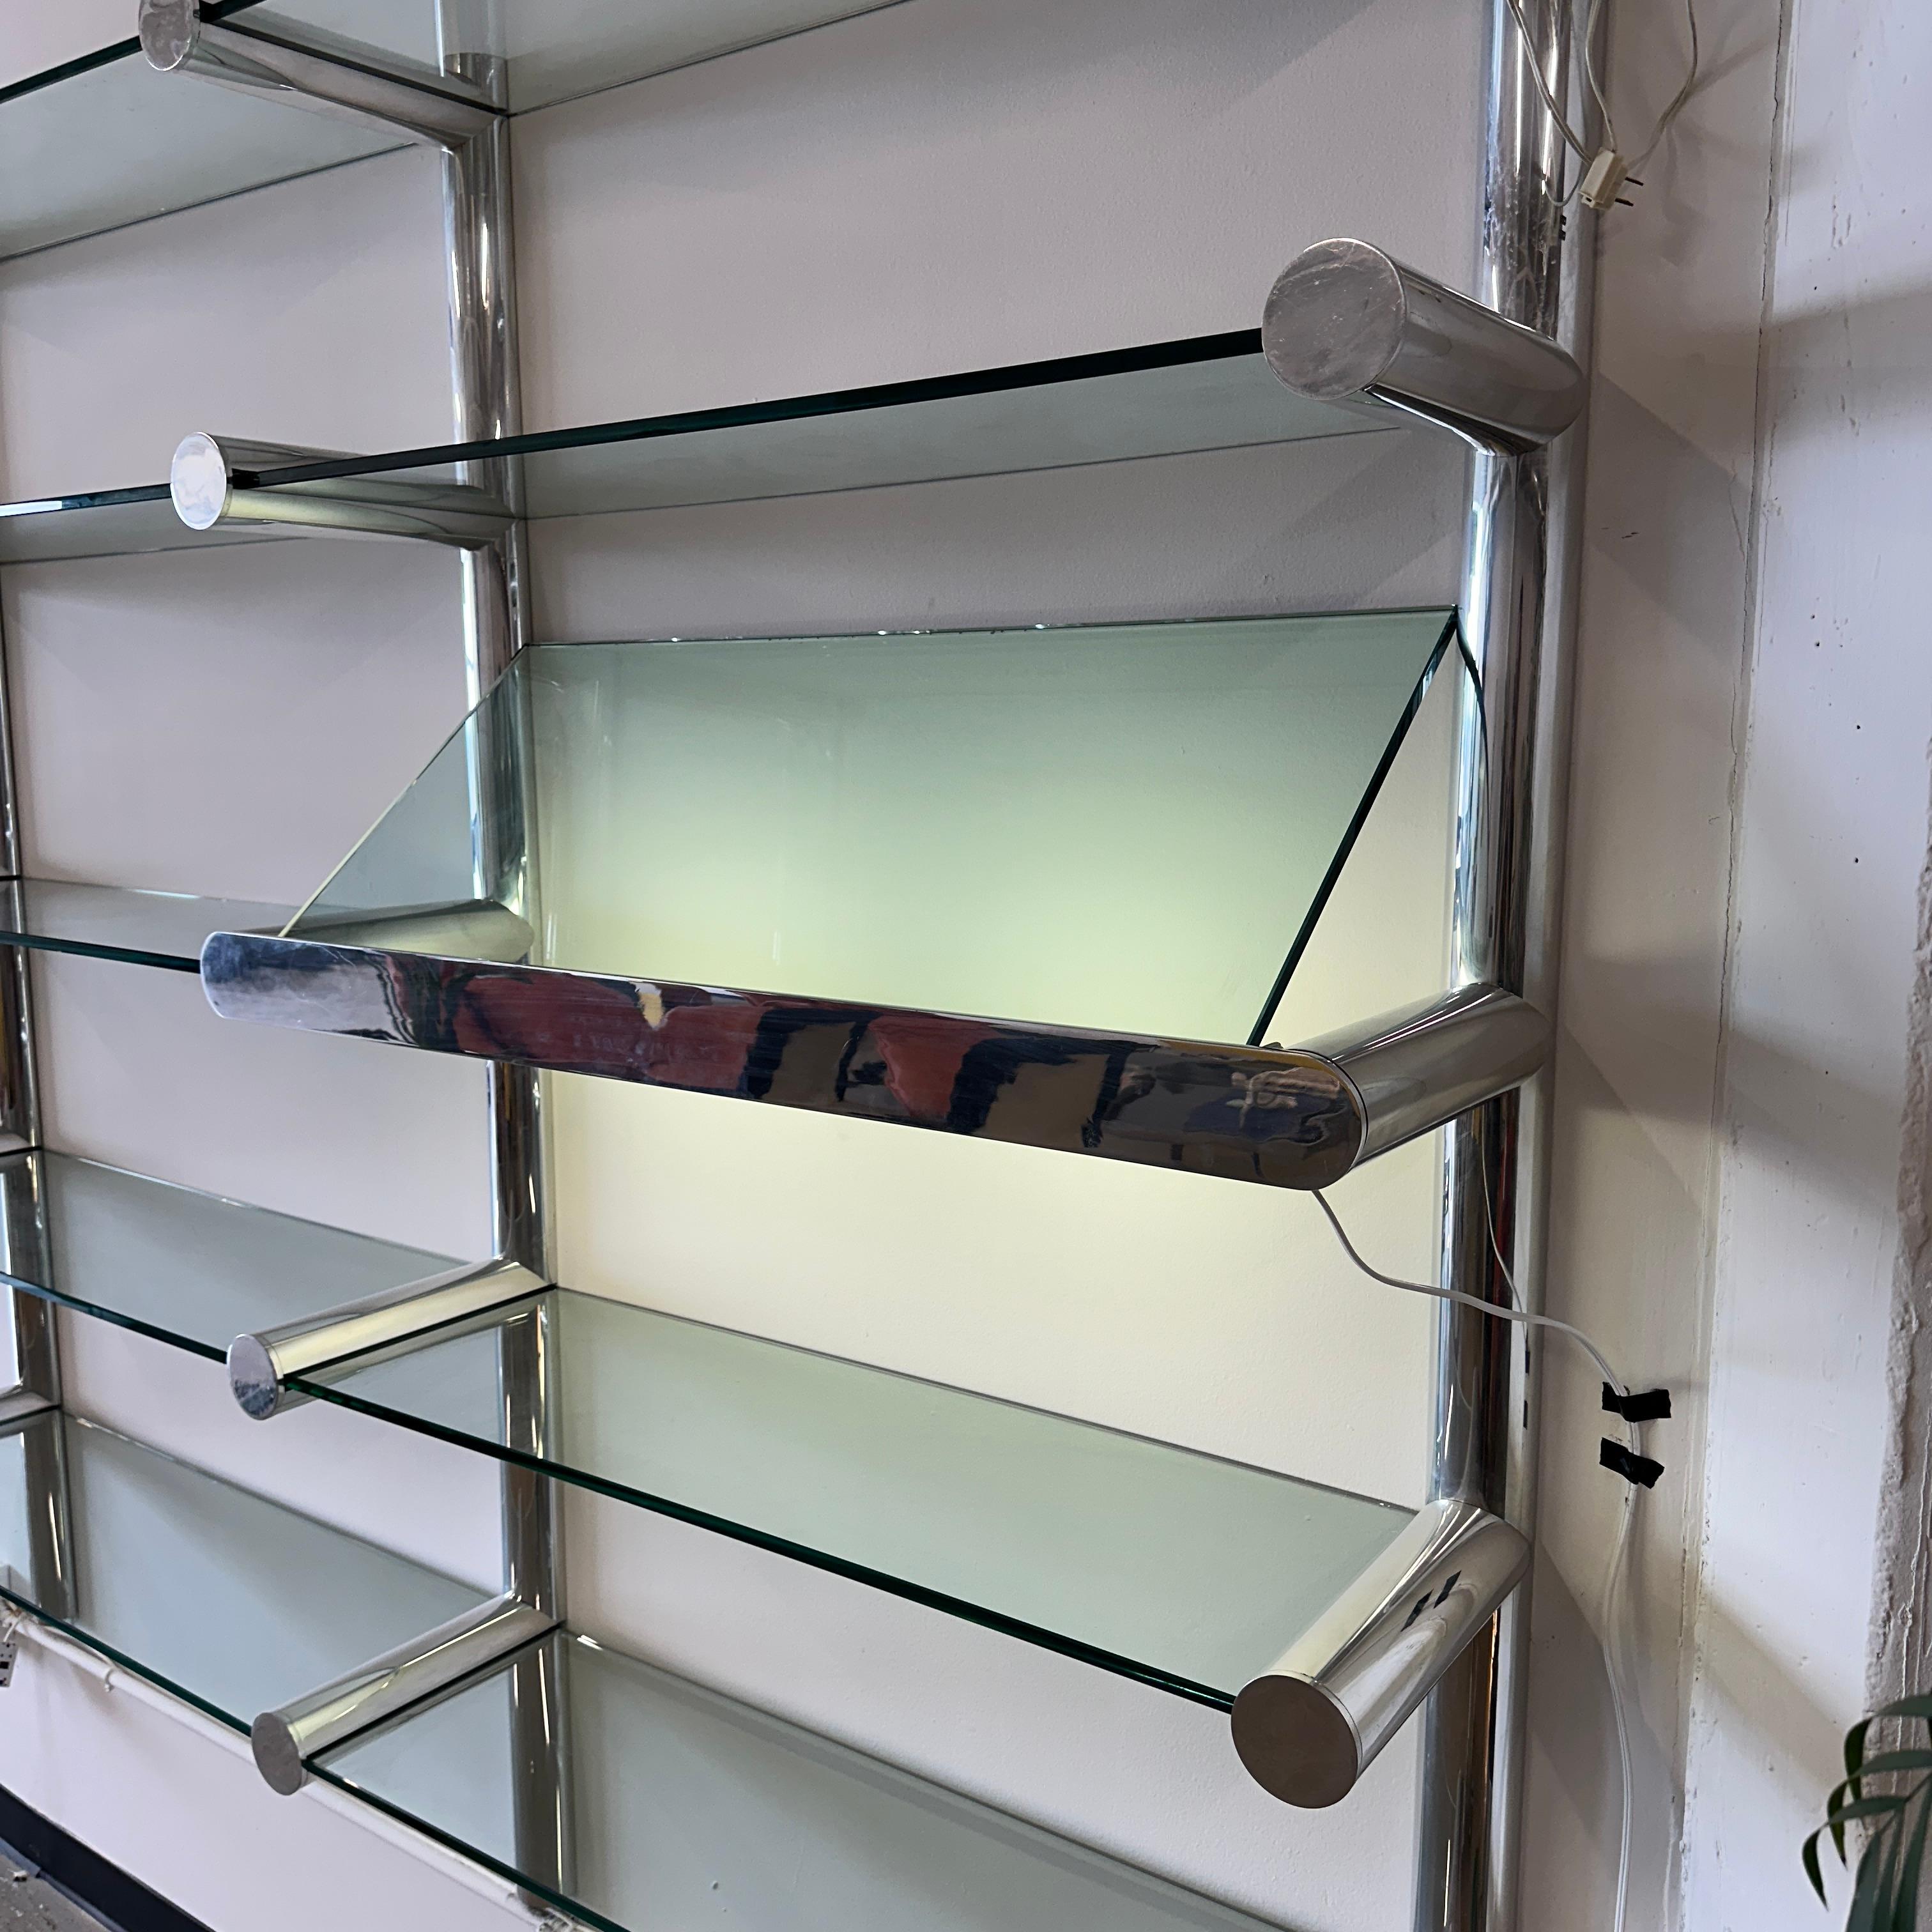 c. 1970s featuring an illuminated display shelf. This piece is in great vintage condition but has scuffs, scratches, etc. There are also some chips missing on the glass but they are fully hidden when the unit is assembled since the chipped pieces